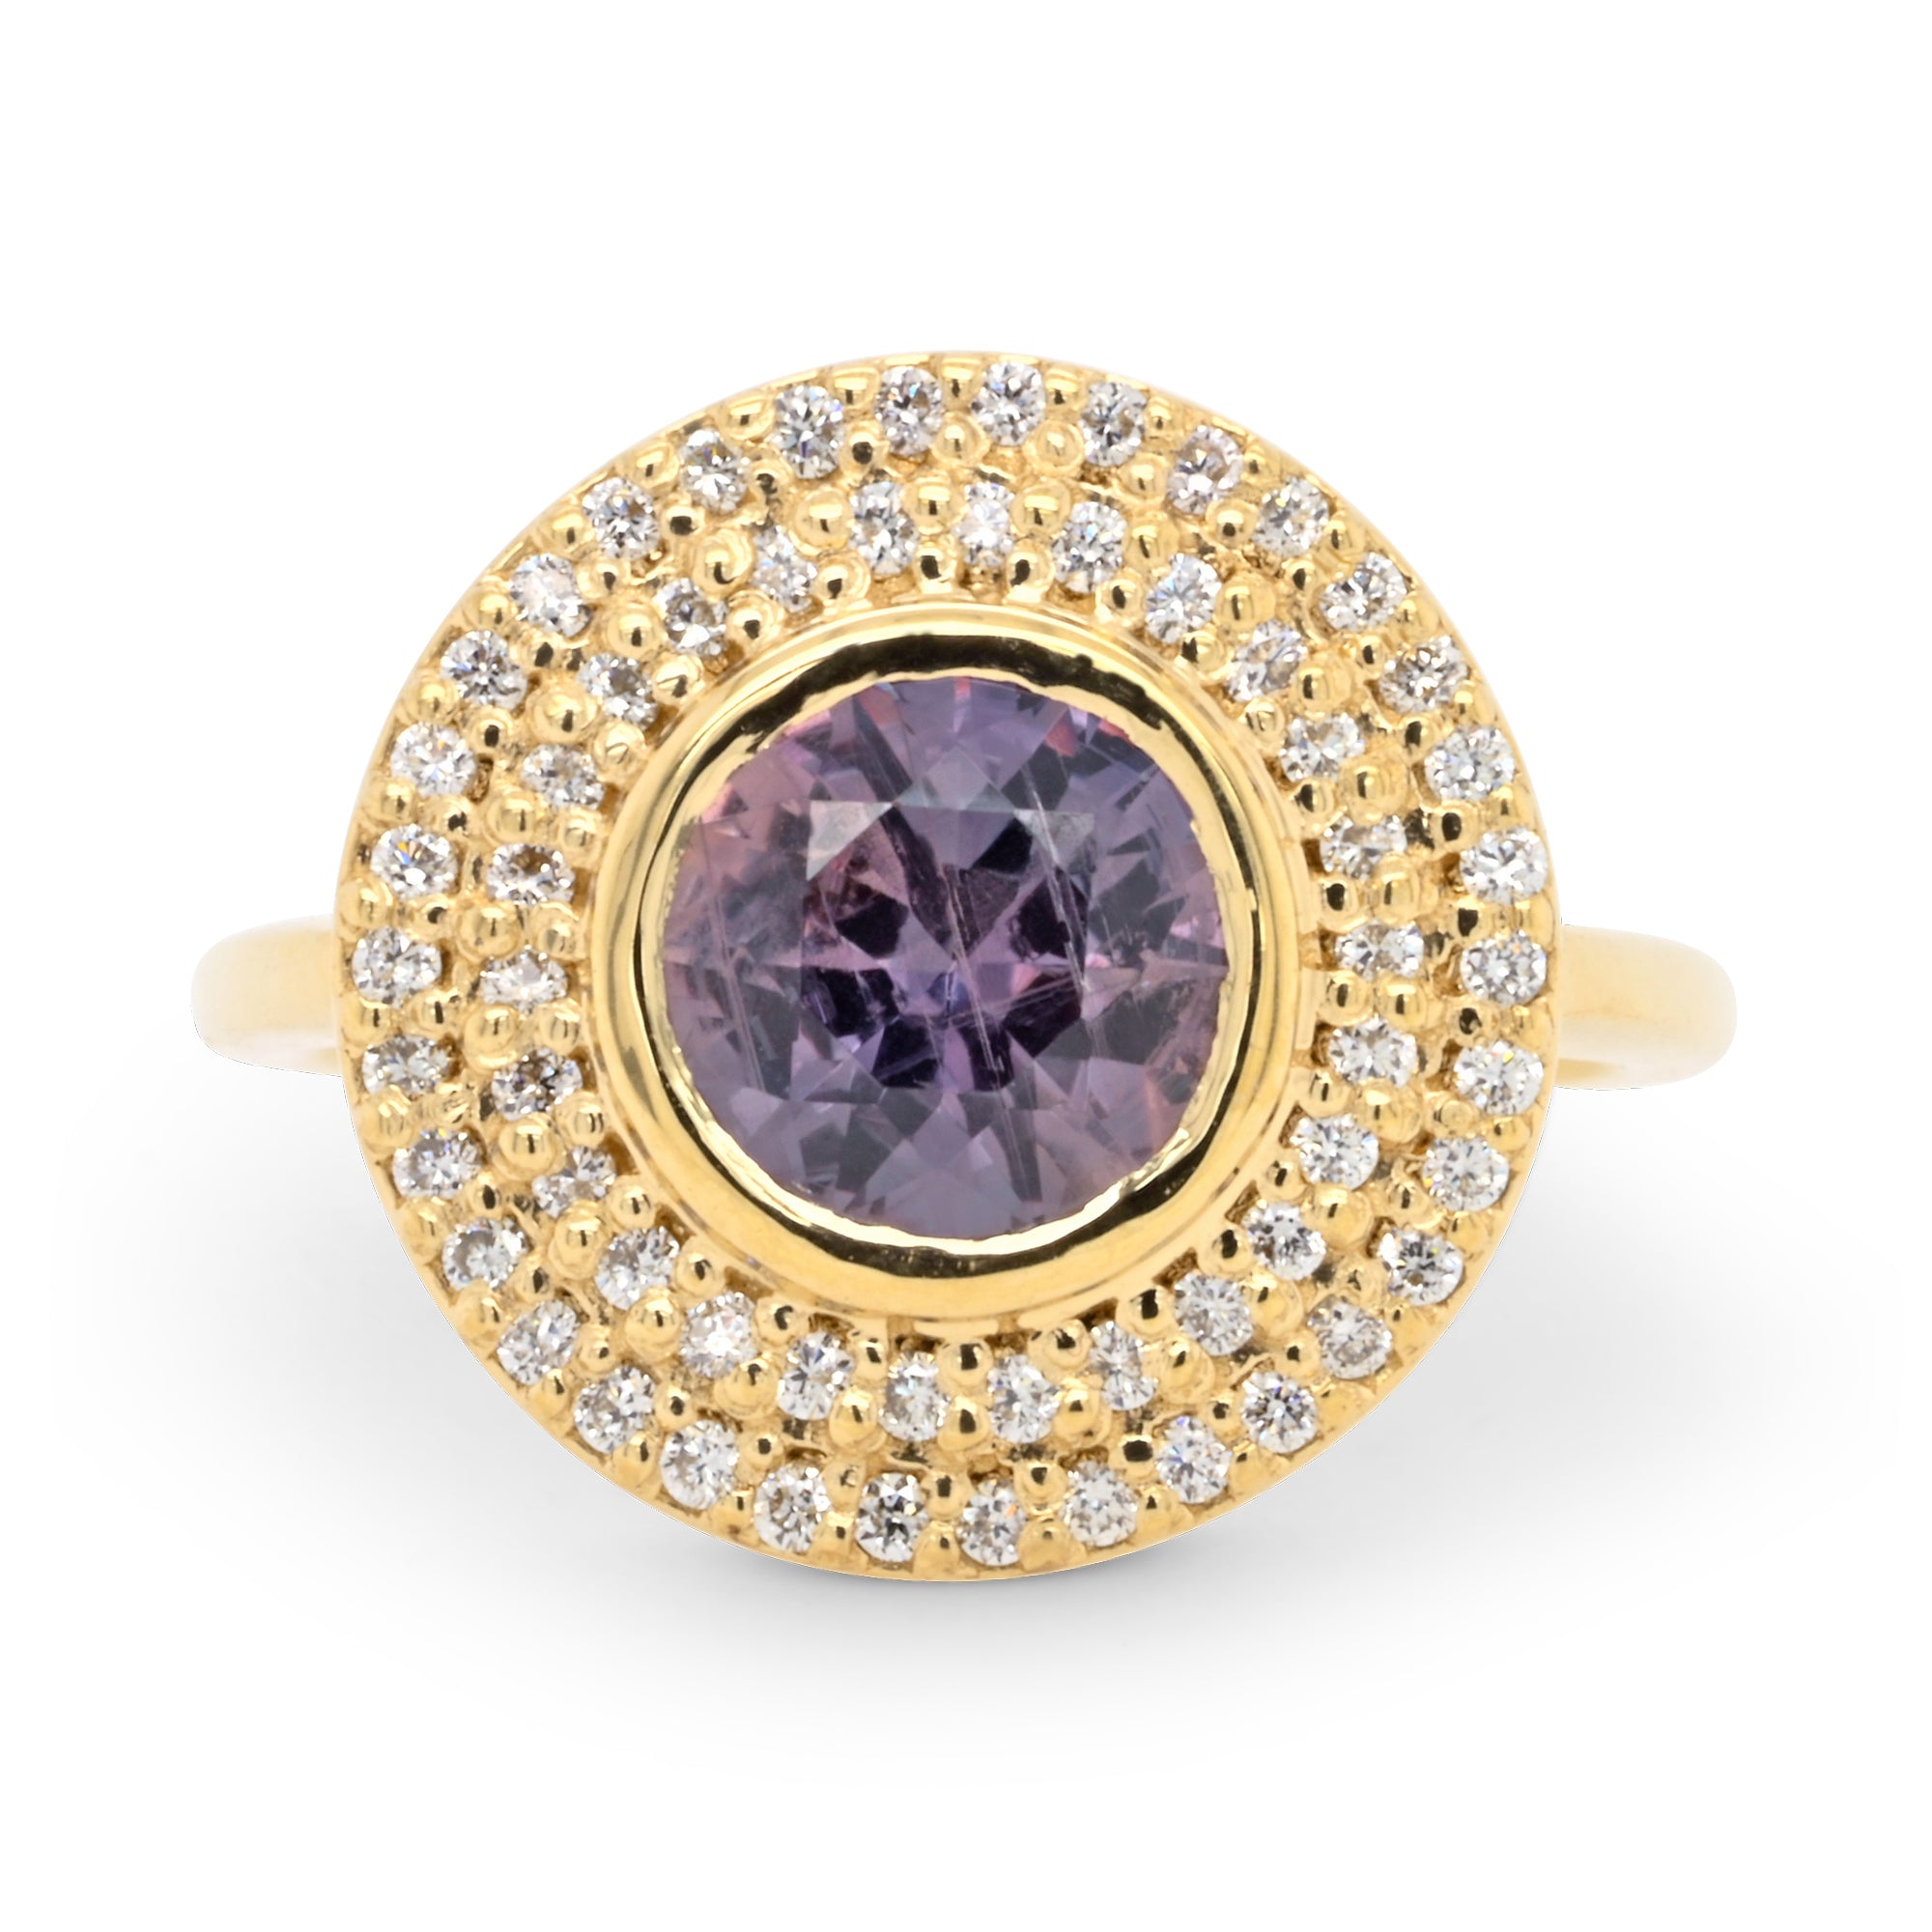 14k yellow gold engagement ring with a round purple sapphire and double halo of diamonds